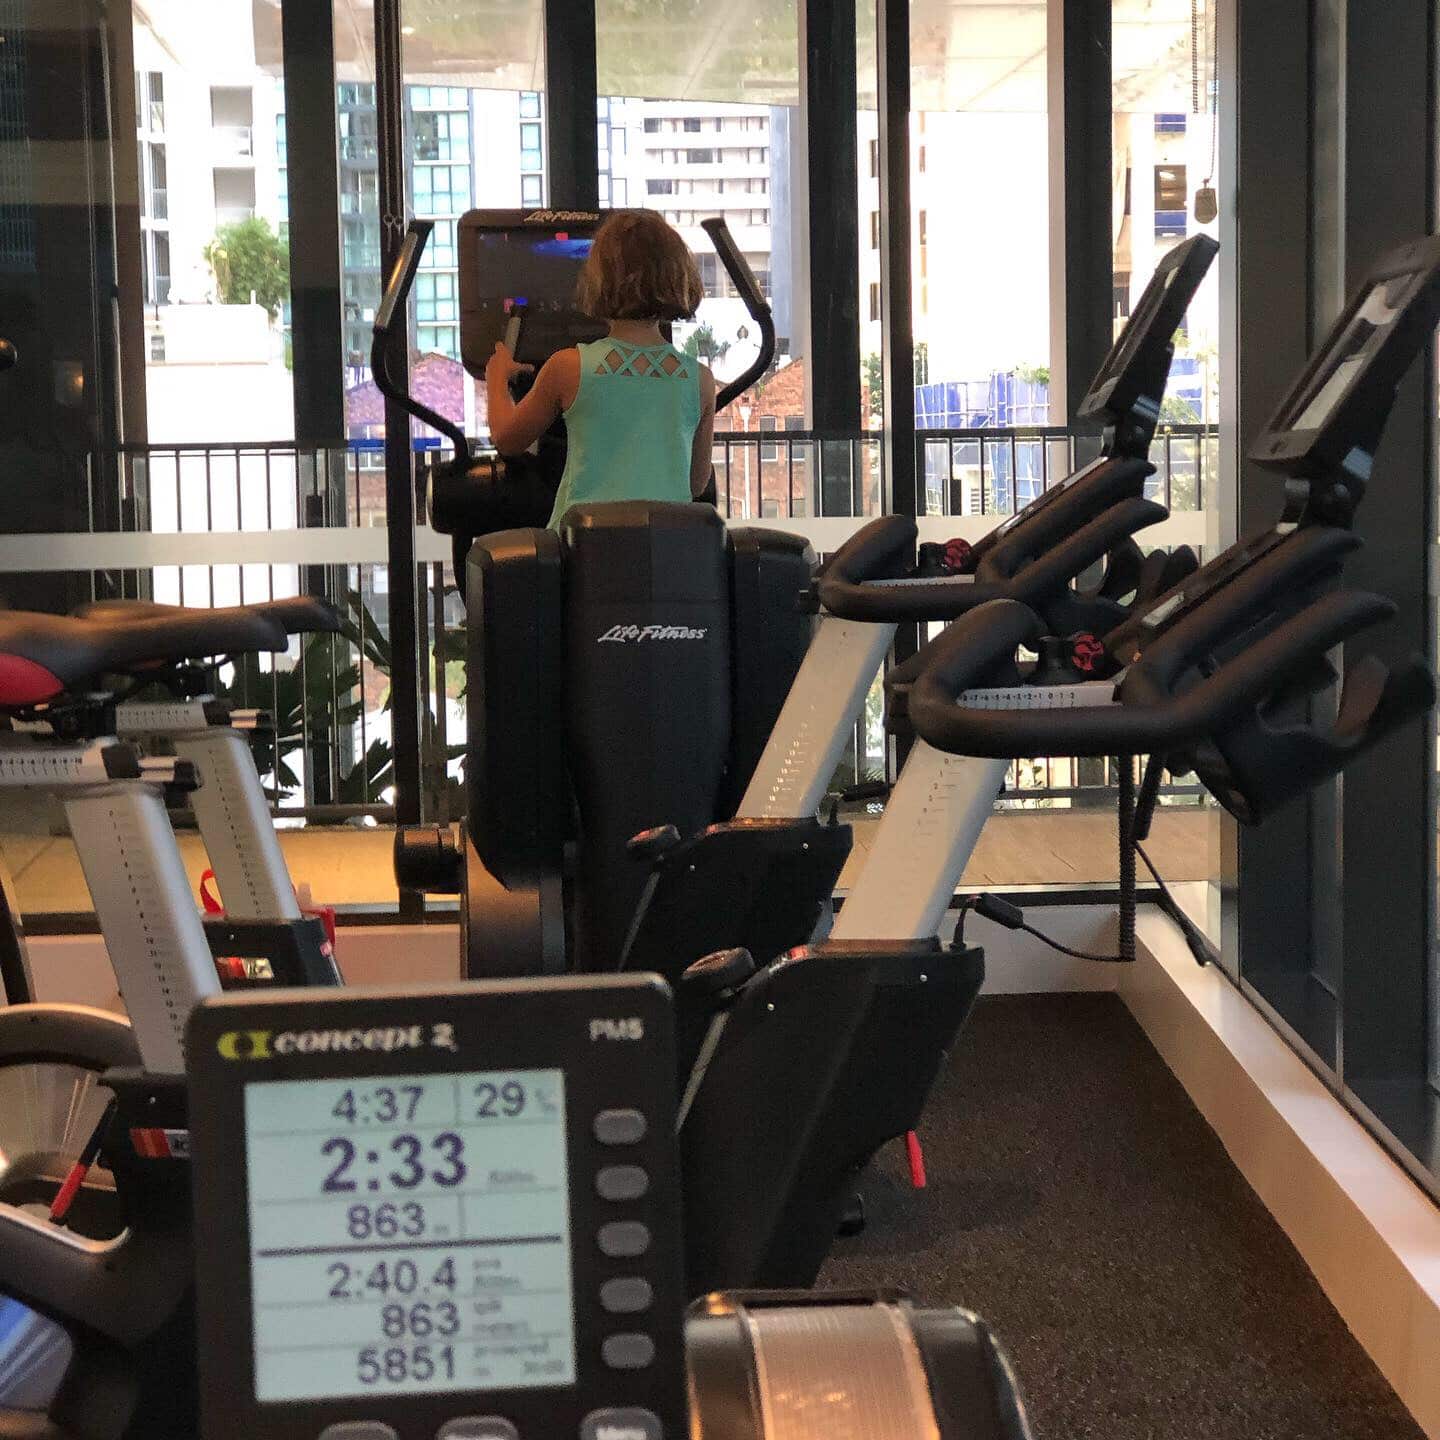 Working out at the fancy hotel